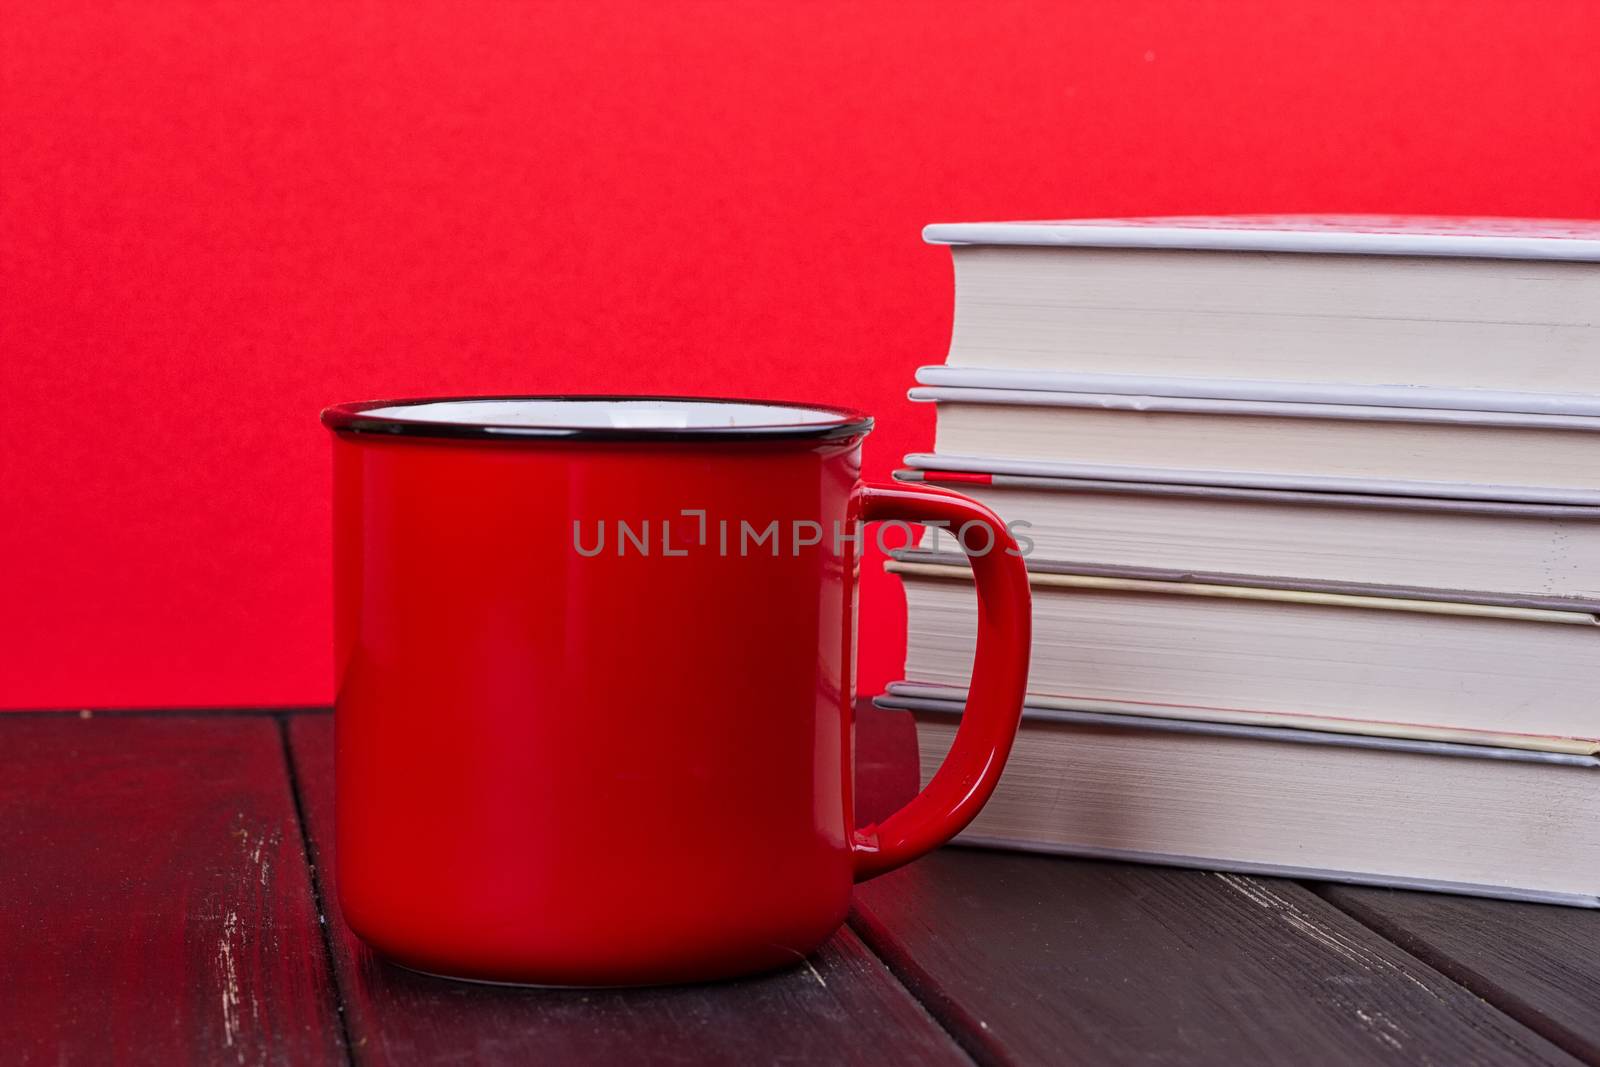 Old vintage books and a red mug